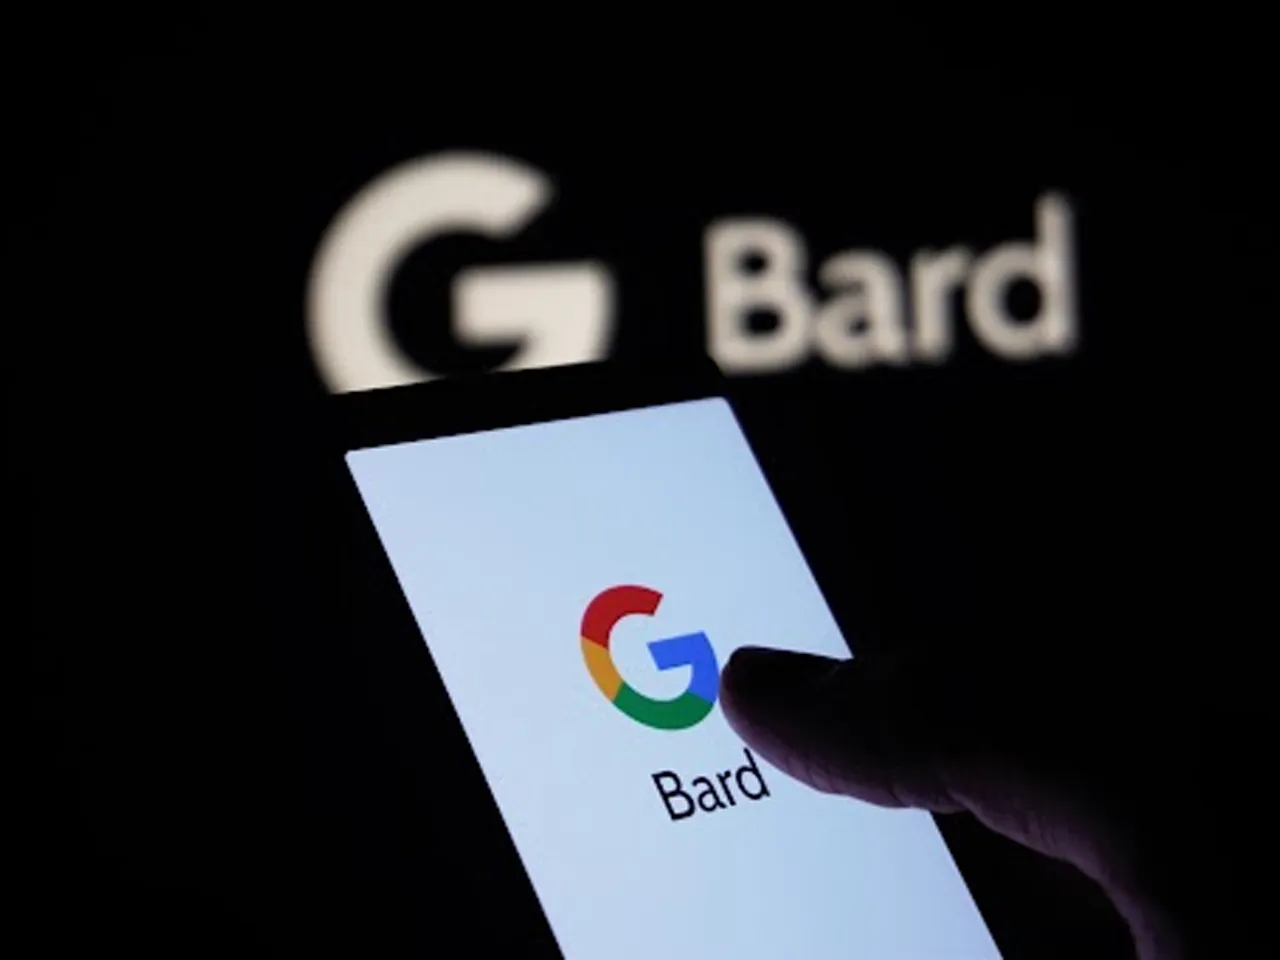 Google's Bard AI now answers video content questions on YouTube